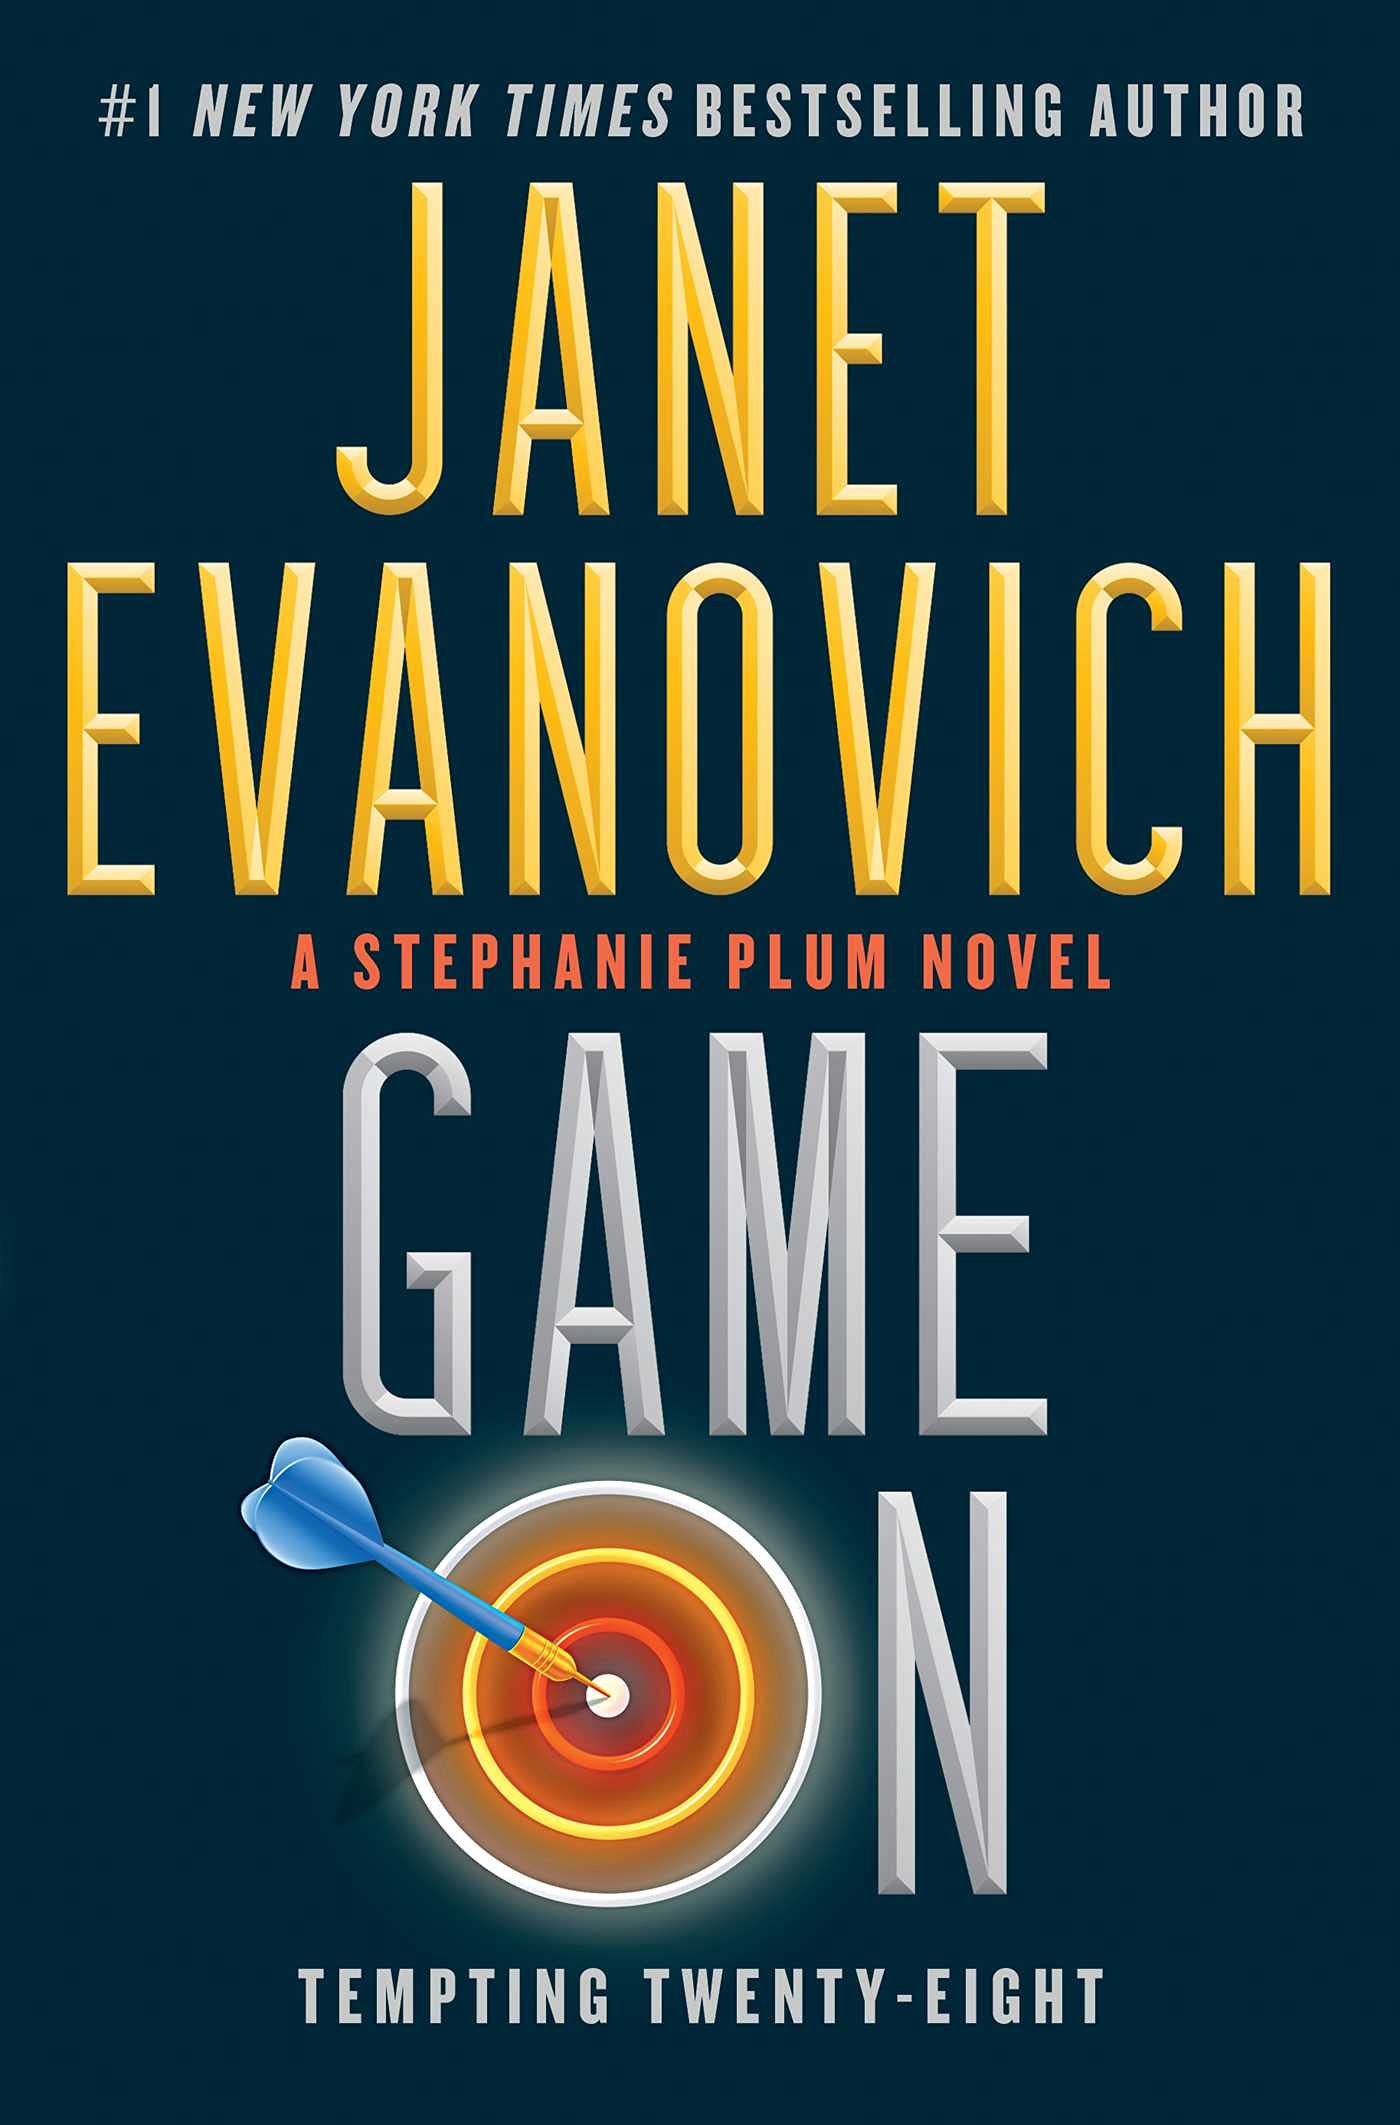 Game On by Janet Evanovich